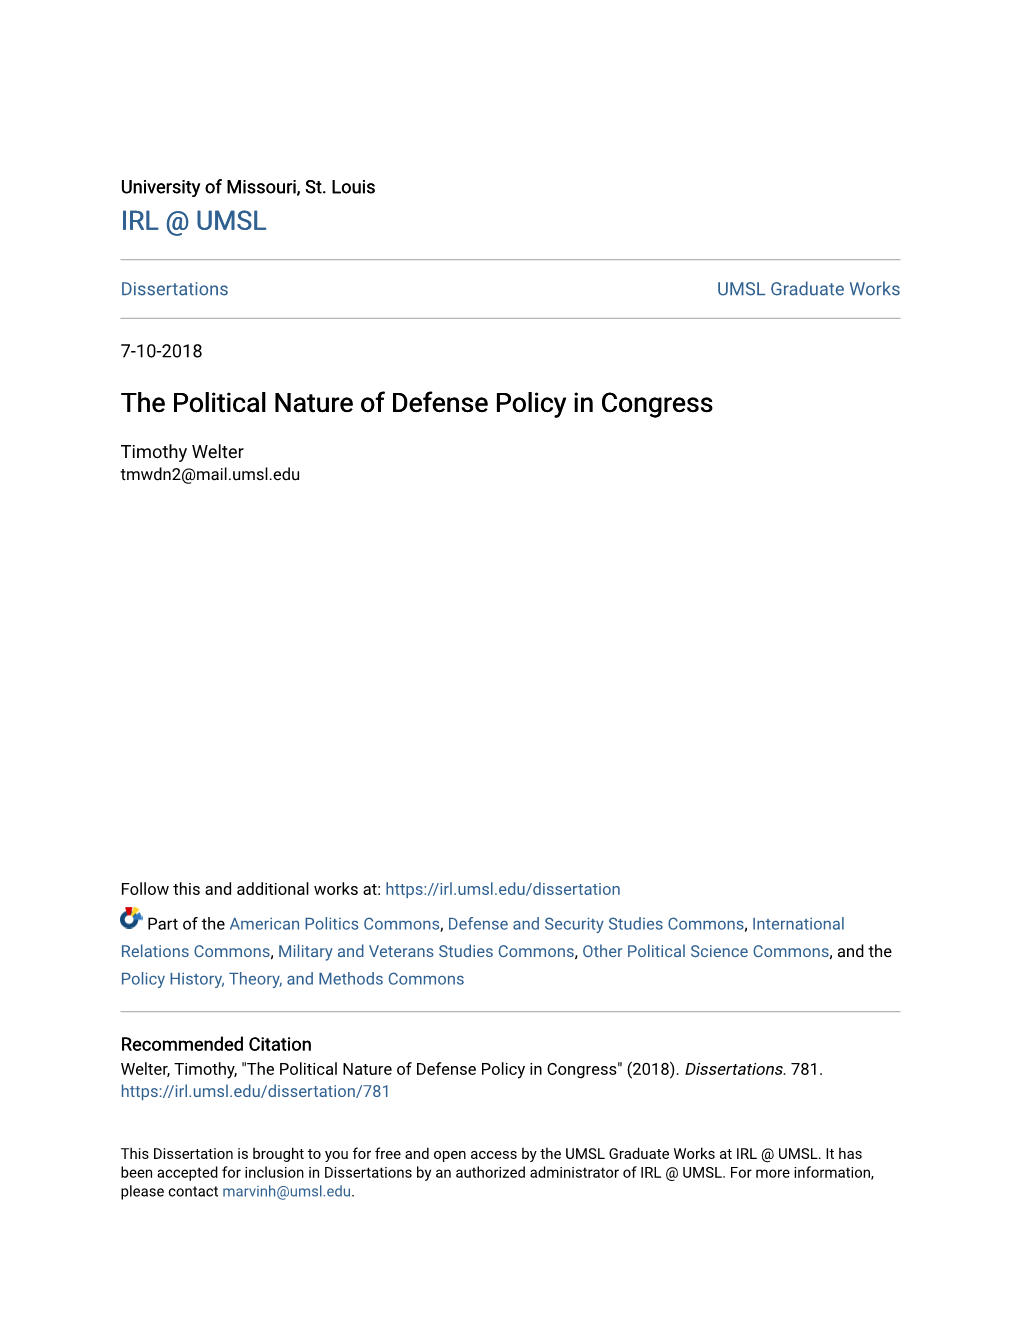 The Political Nature of Defense Policy in Congress